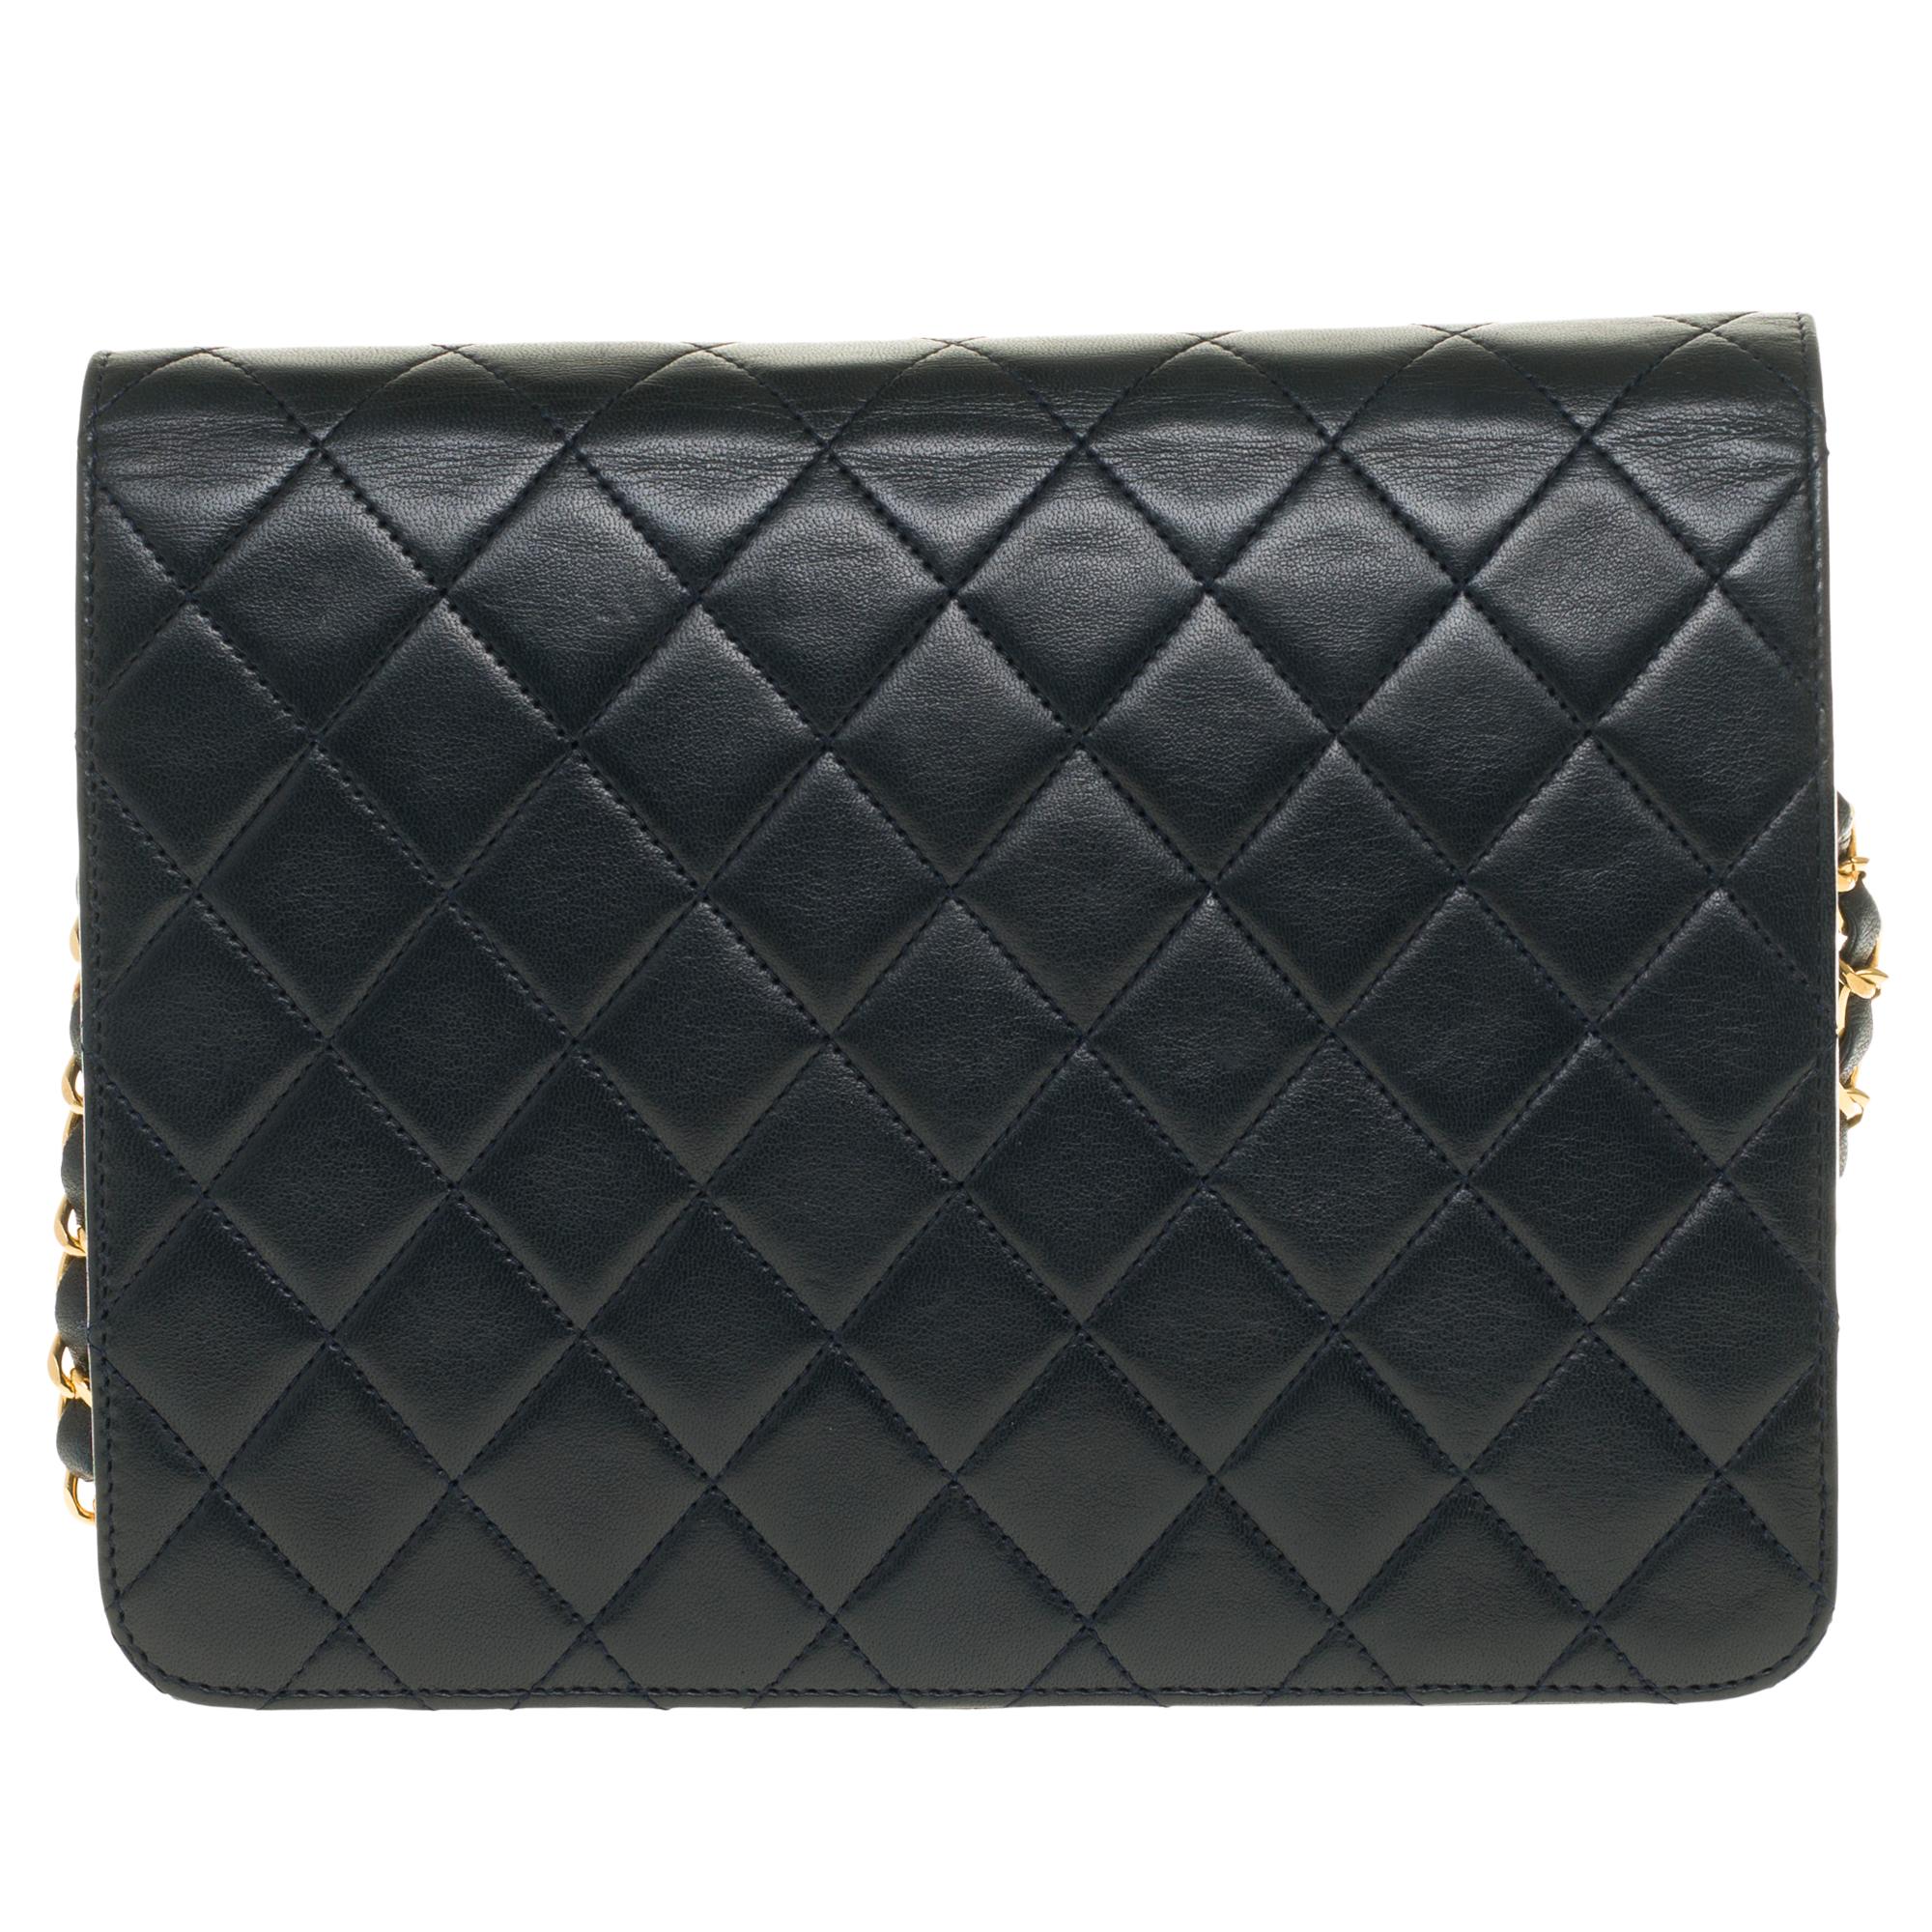 Chic Chanel Classique shoulder bag in black quilted leather, gold plated metal trim (24k plated), a gold plated metal chain handle intertwined with black leather allowing a shoulder or shoulder strap.

Gilded metal logo closure on flap.
Lining in